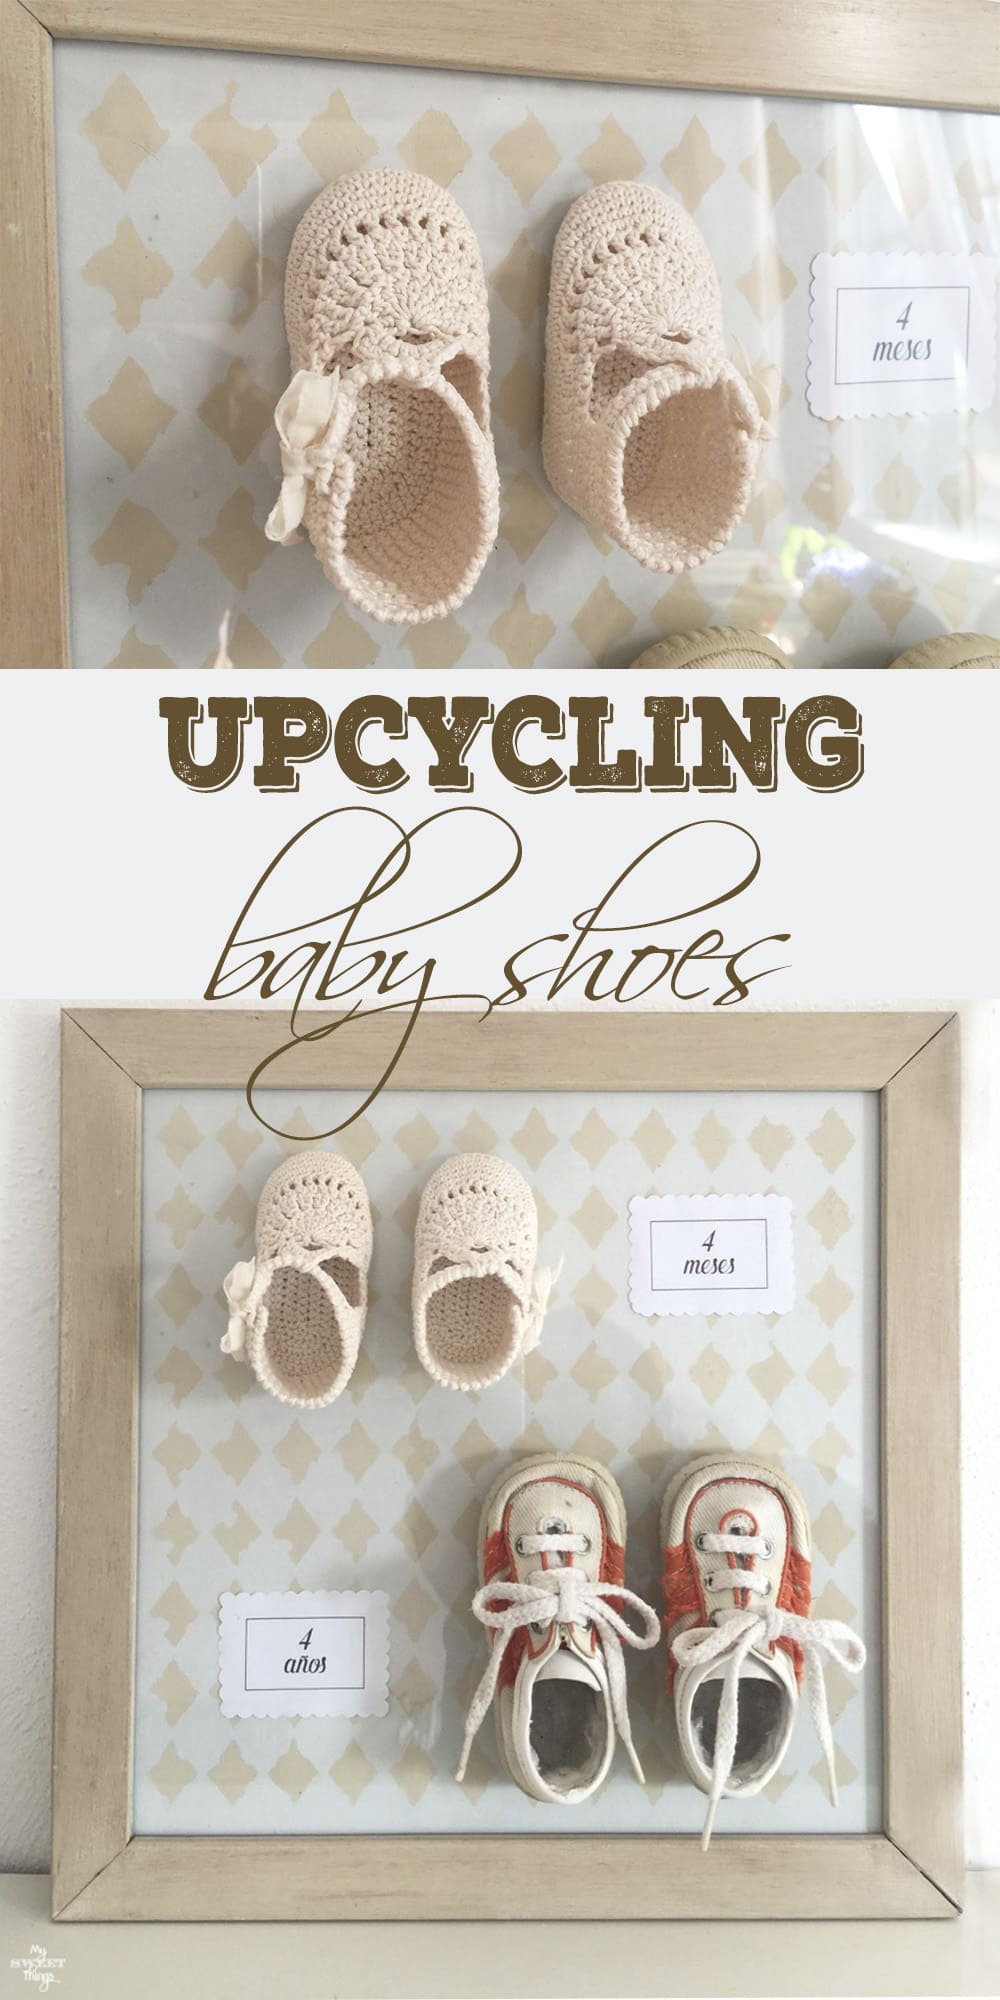 Upcycling baby shoes as a Valentine's Day gift. An easy DIY that can be used as decor too · Via www.sweethings.net